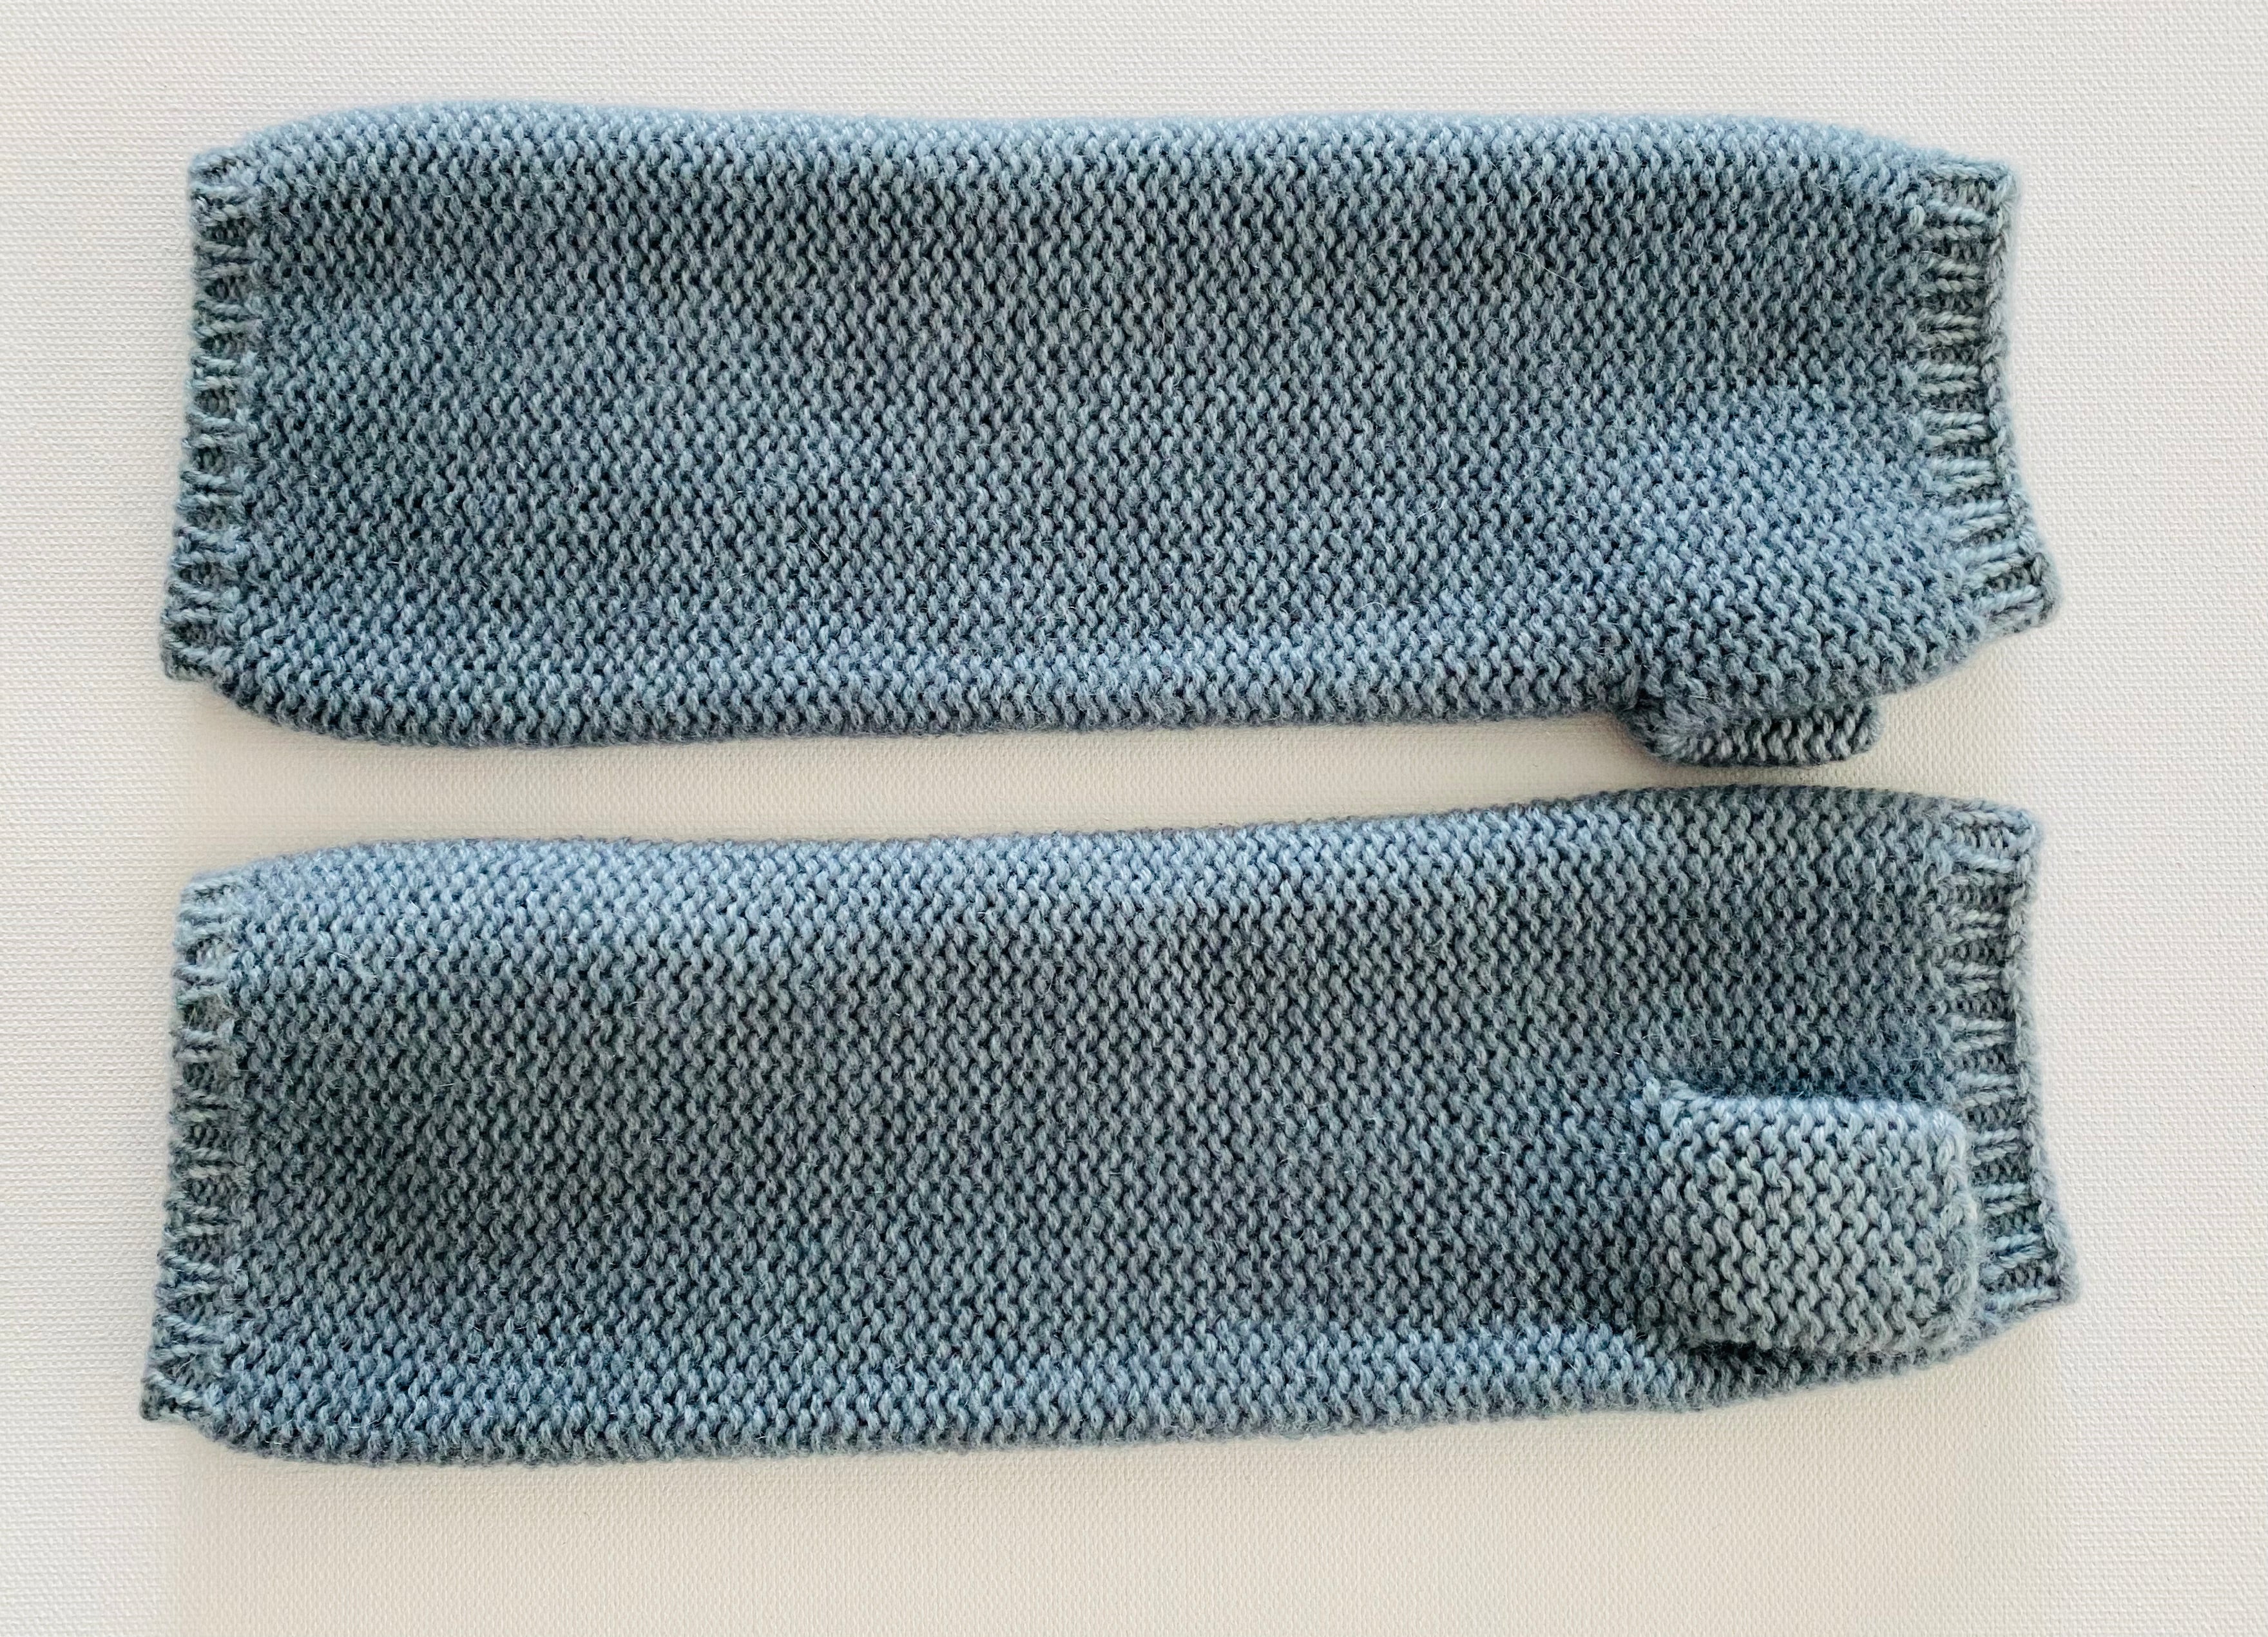 Cashmere knit arm warmers